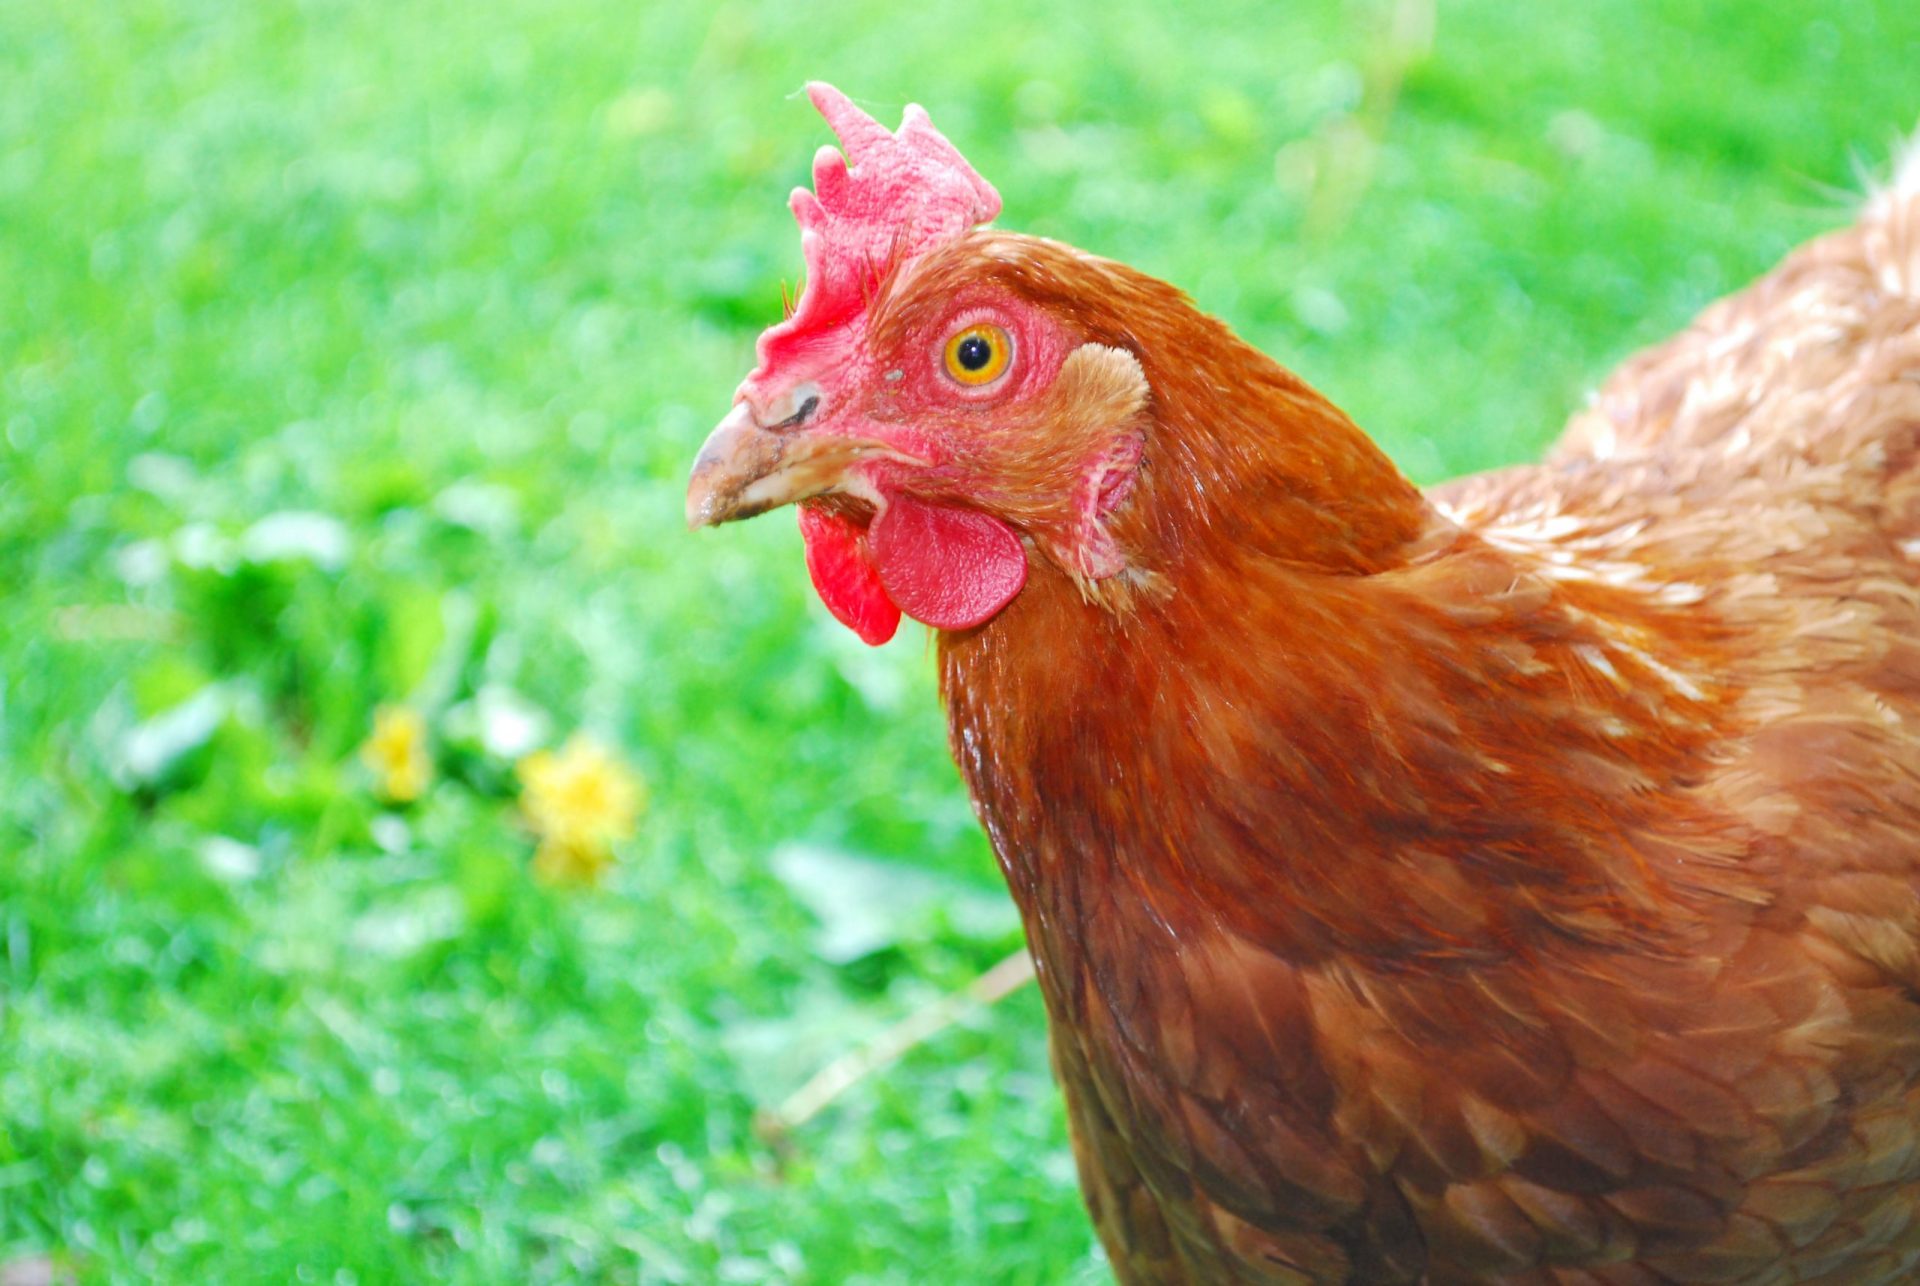 What do Rhode Island red chickens eat